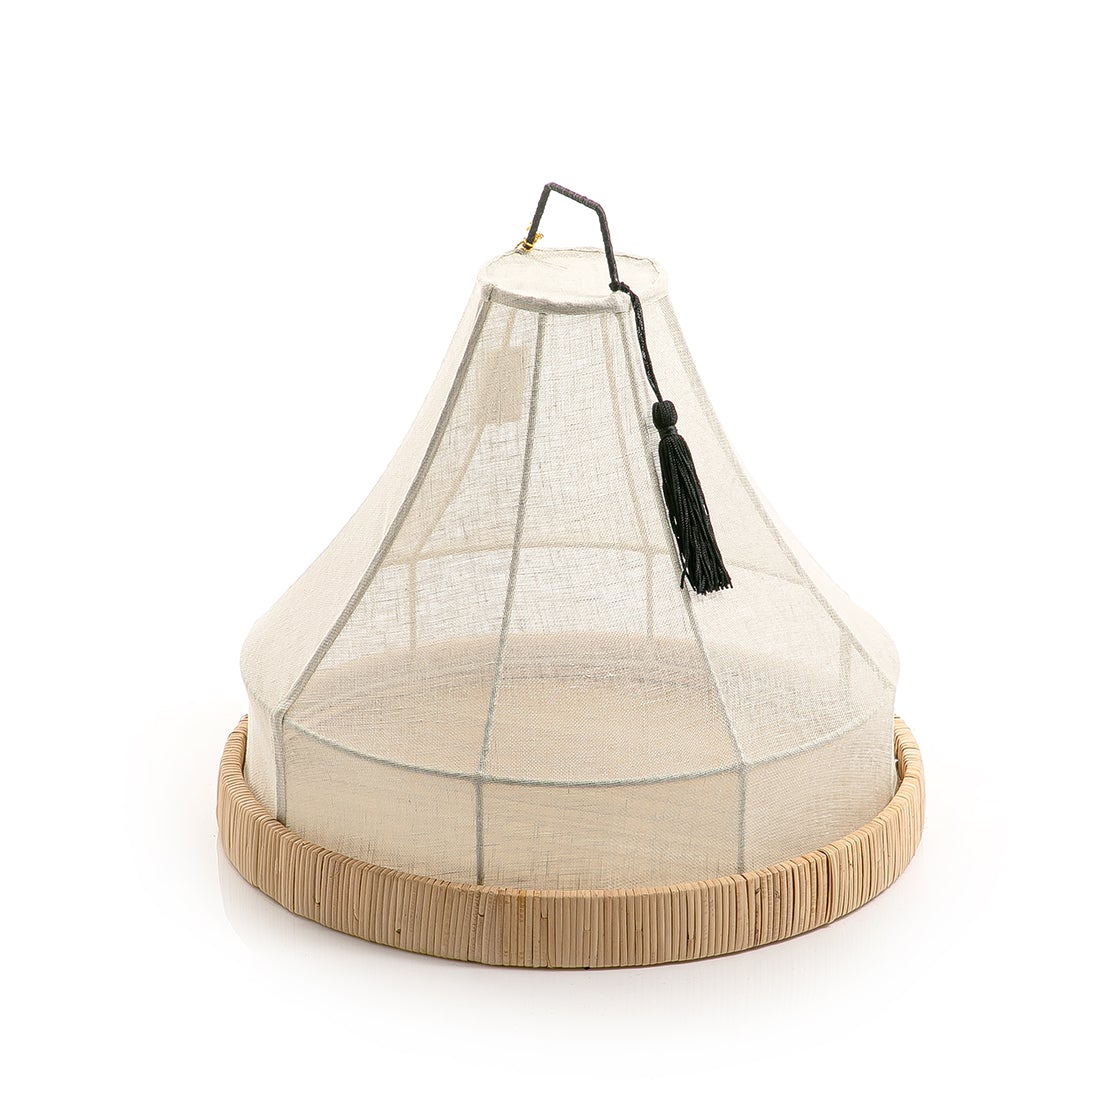 Rattan Tray with Linen Cover - 37cm